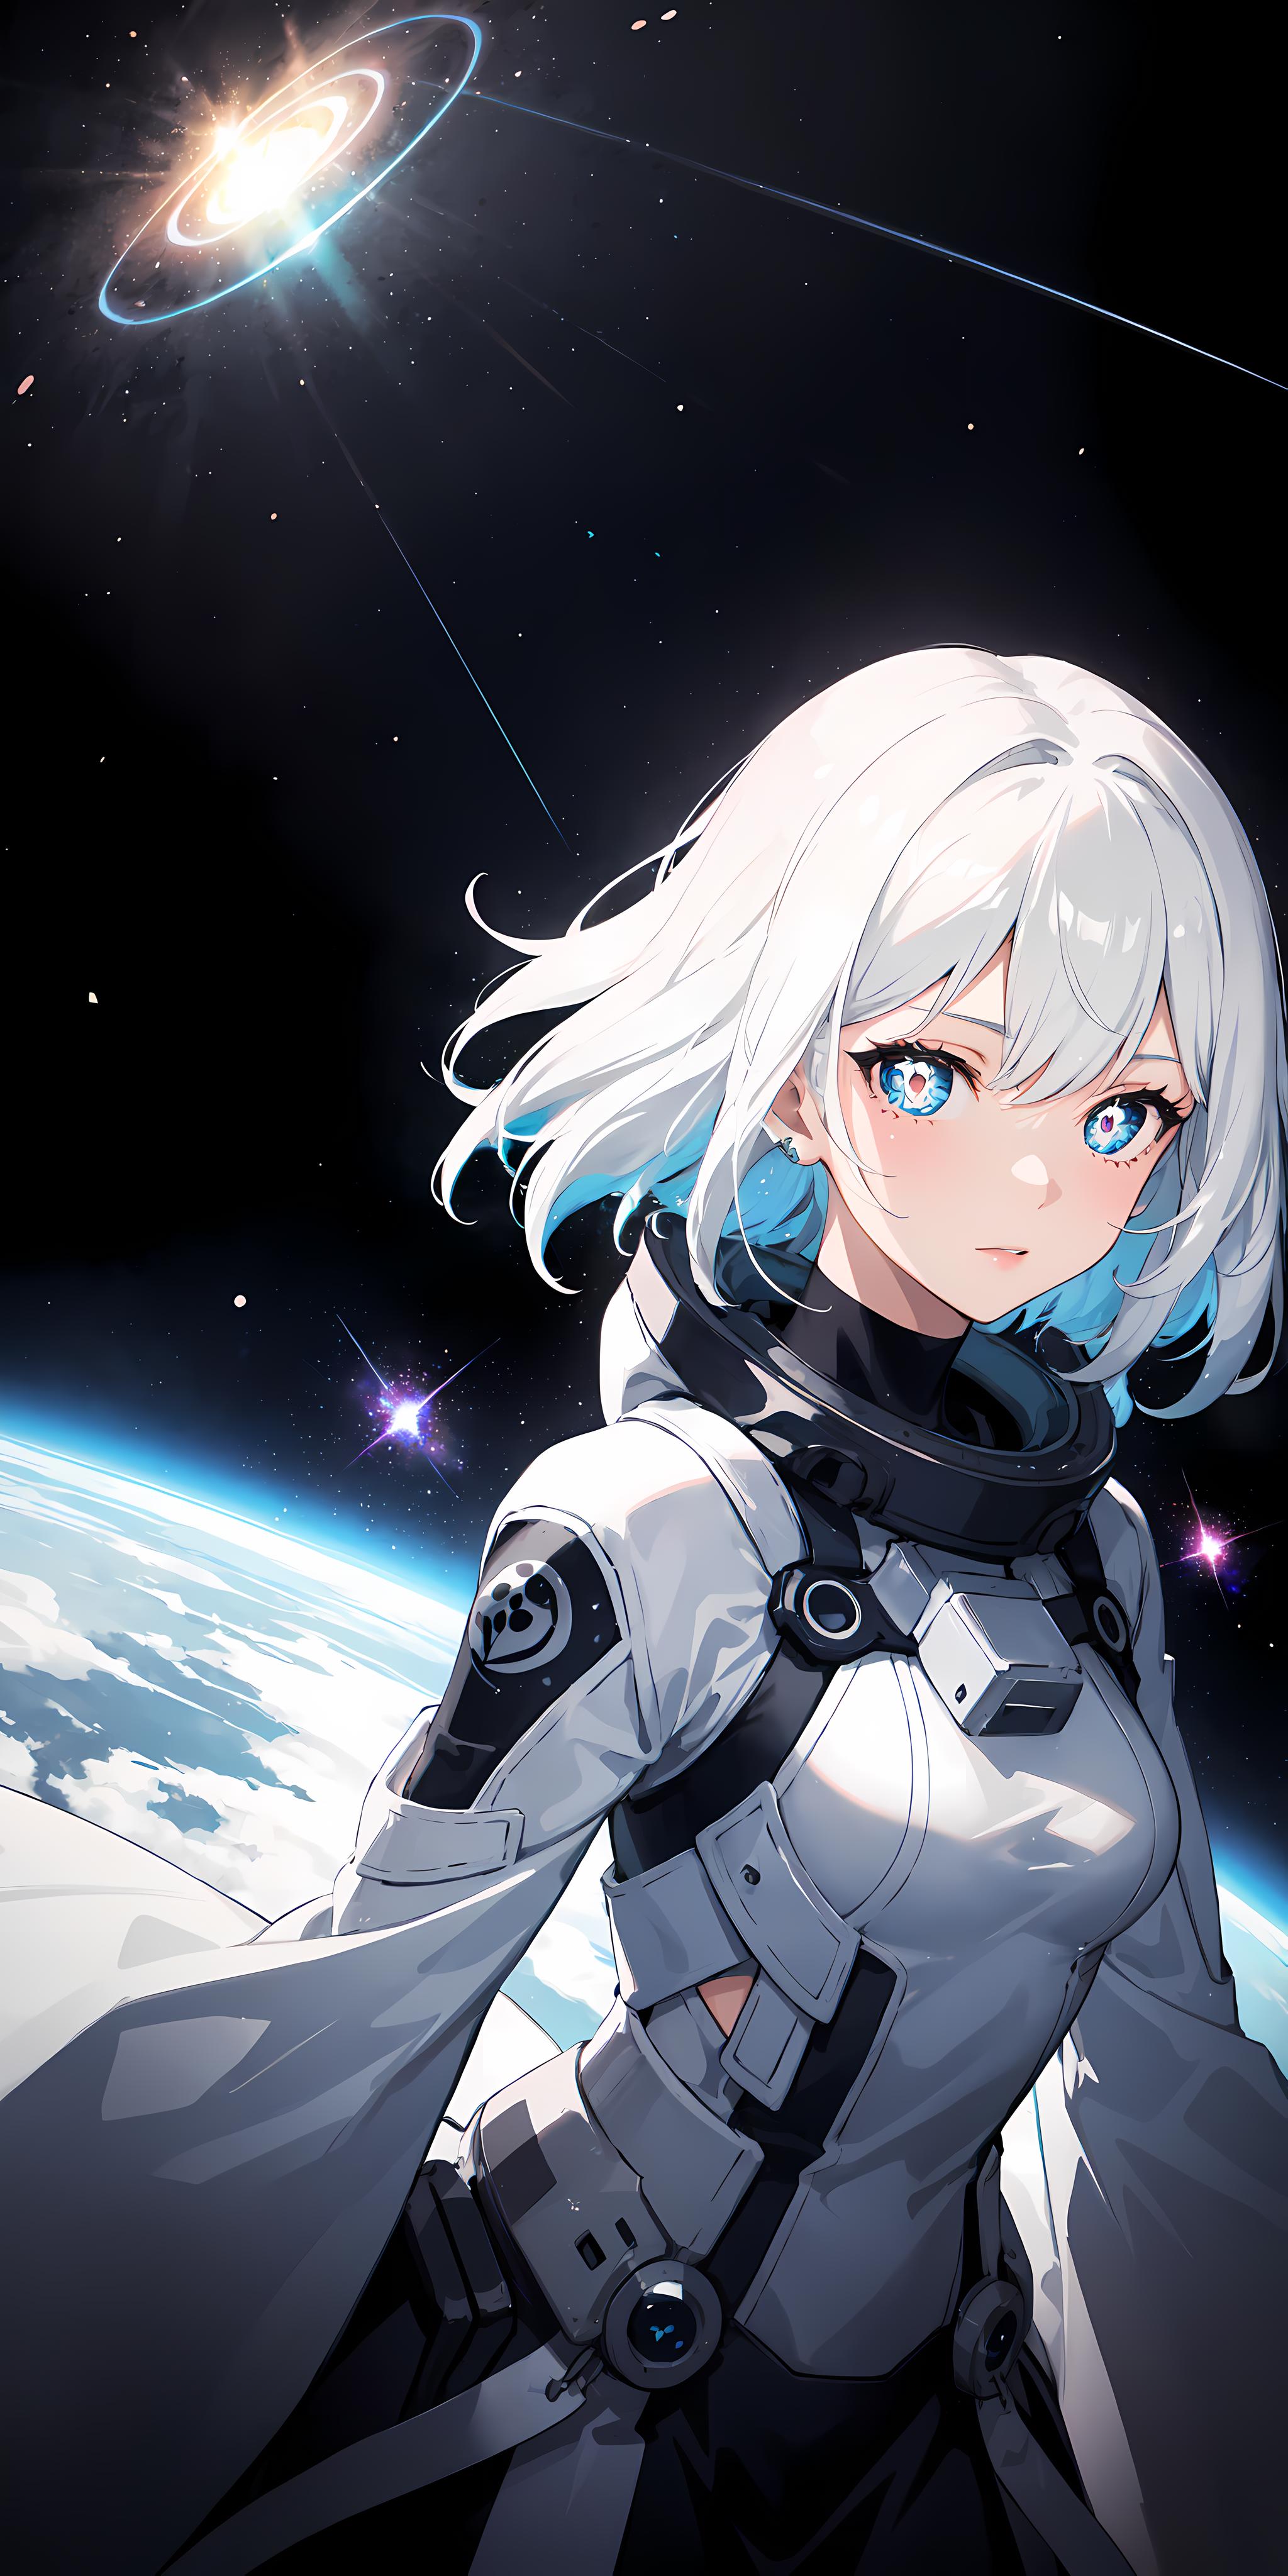 An anime character wearing a white jumpsuit and white helmet, with a blue sky and stars in the background.